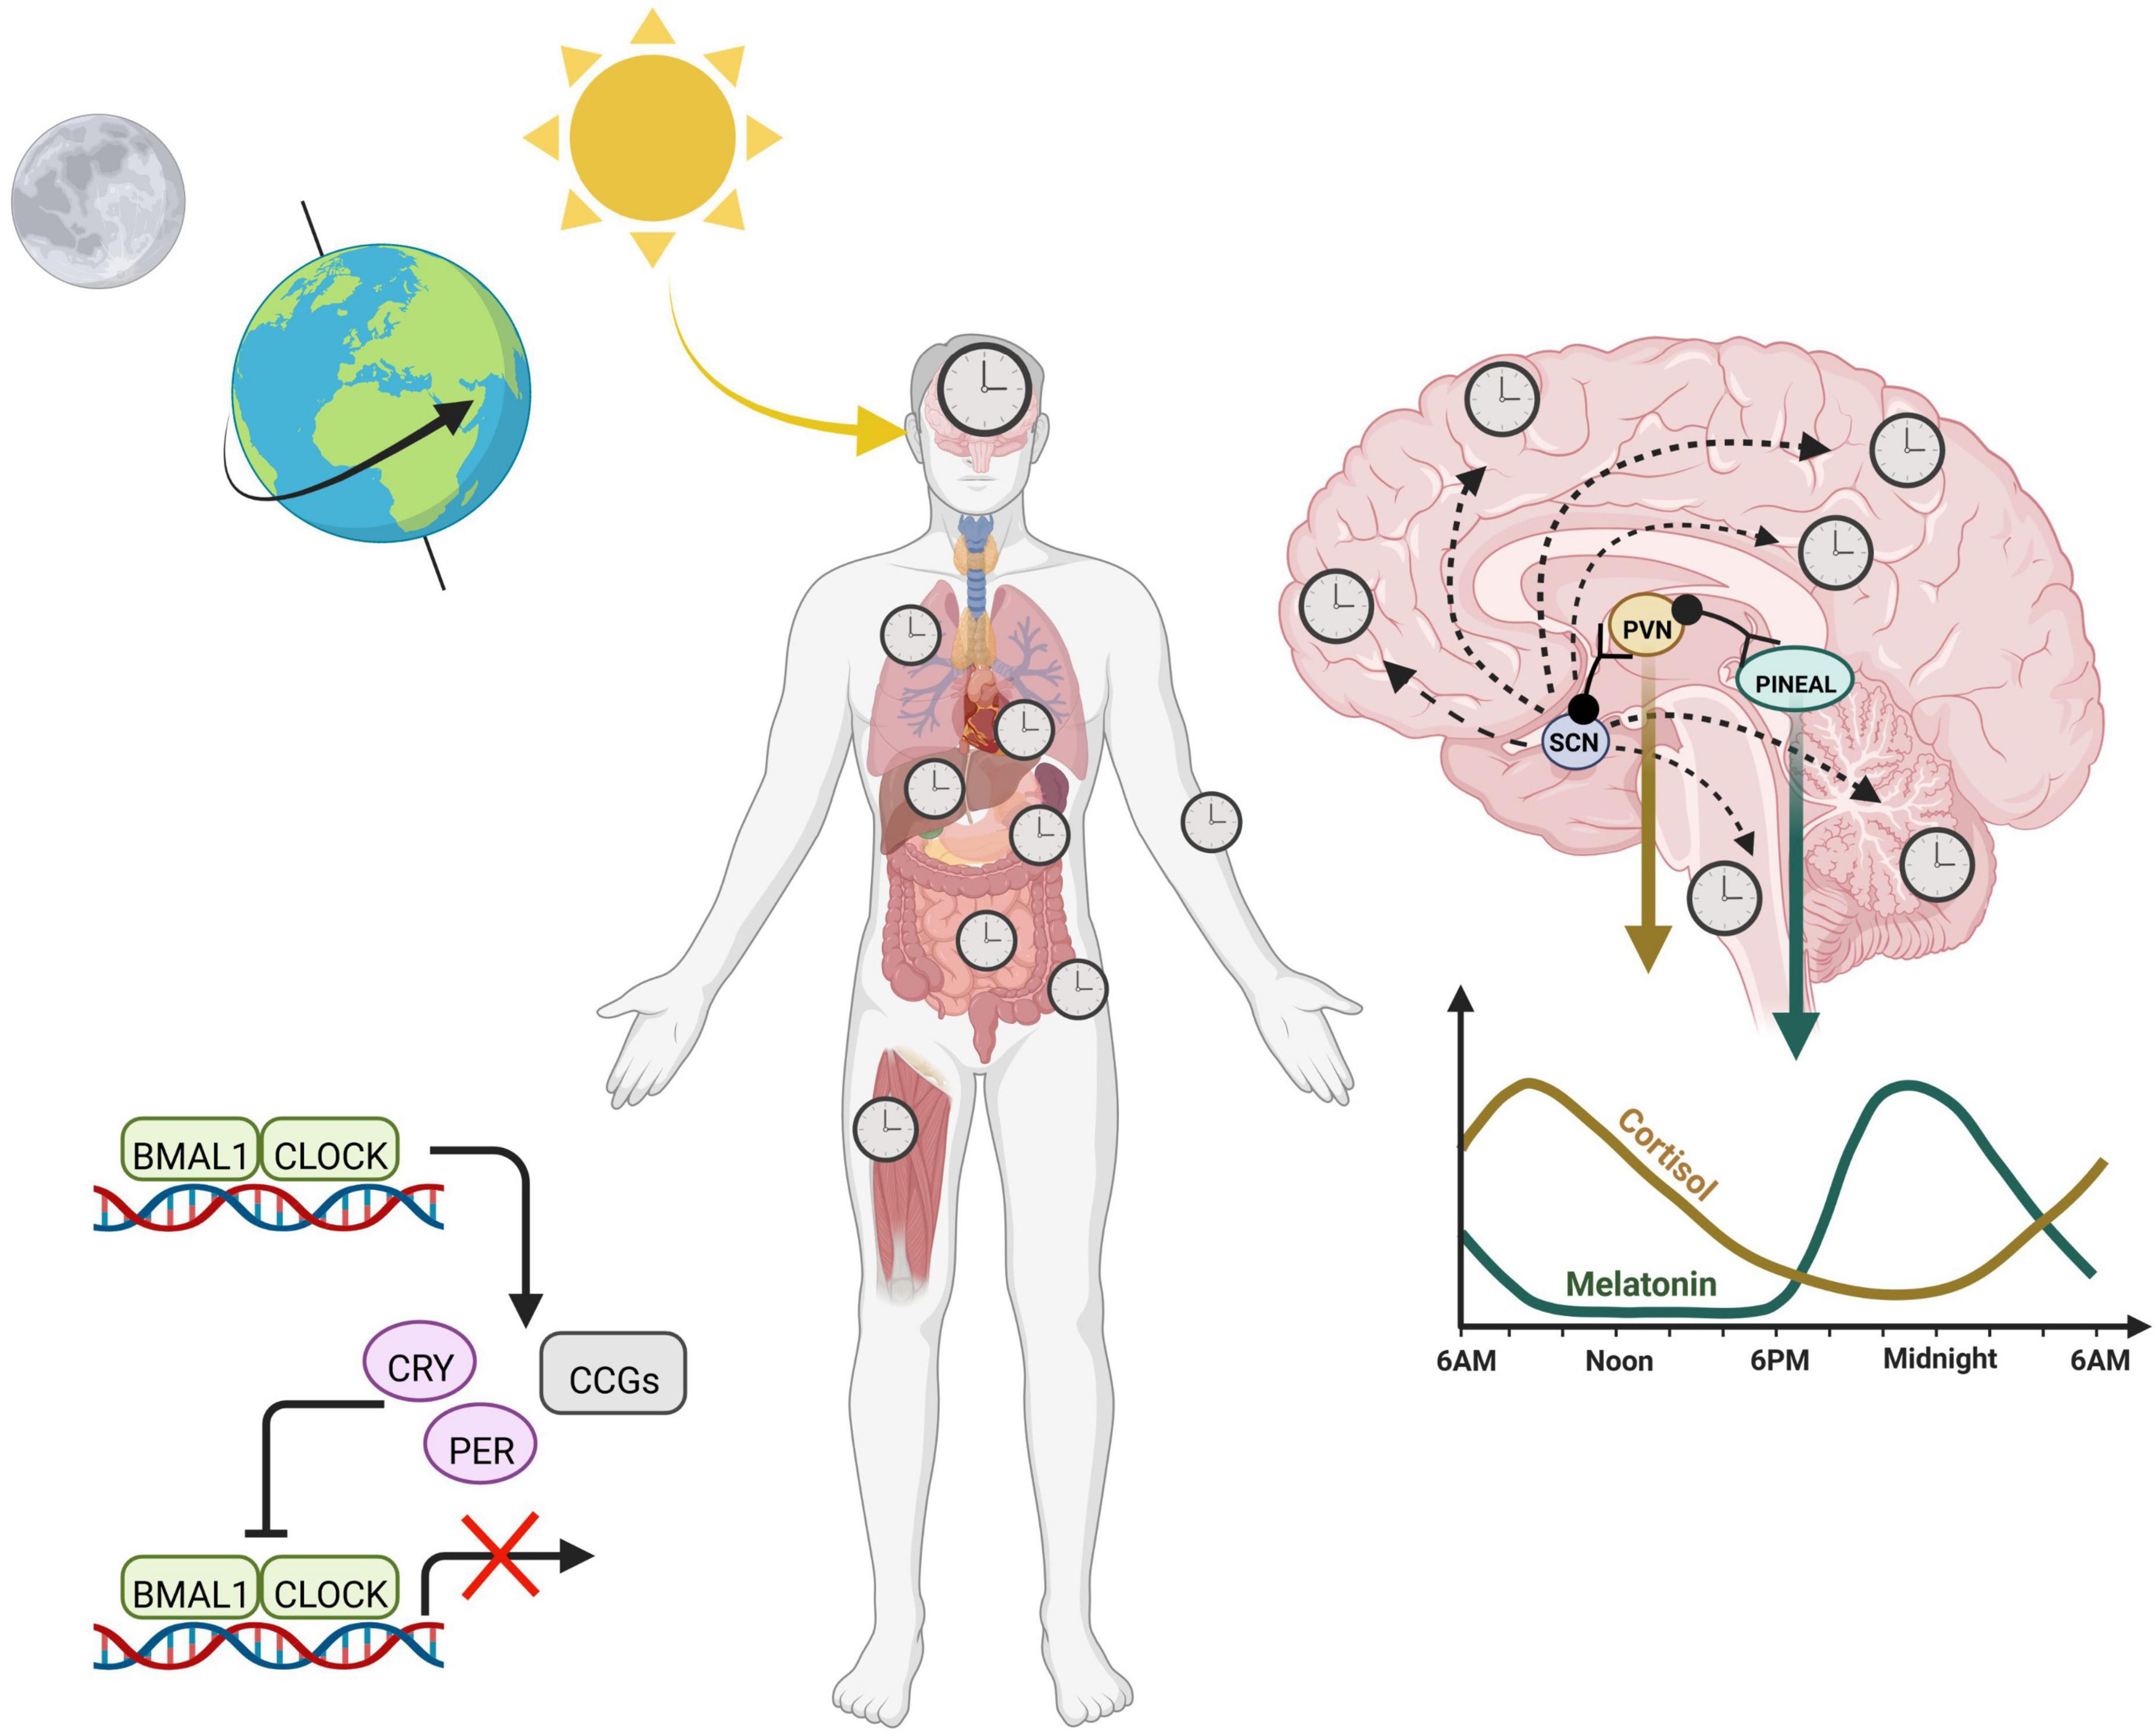 Circadian rhythms as modulators of brain health during development and throughout aging